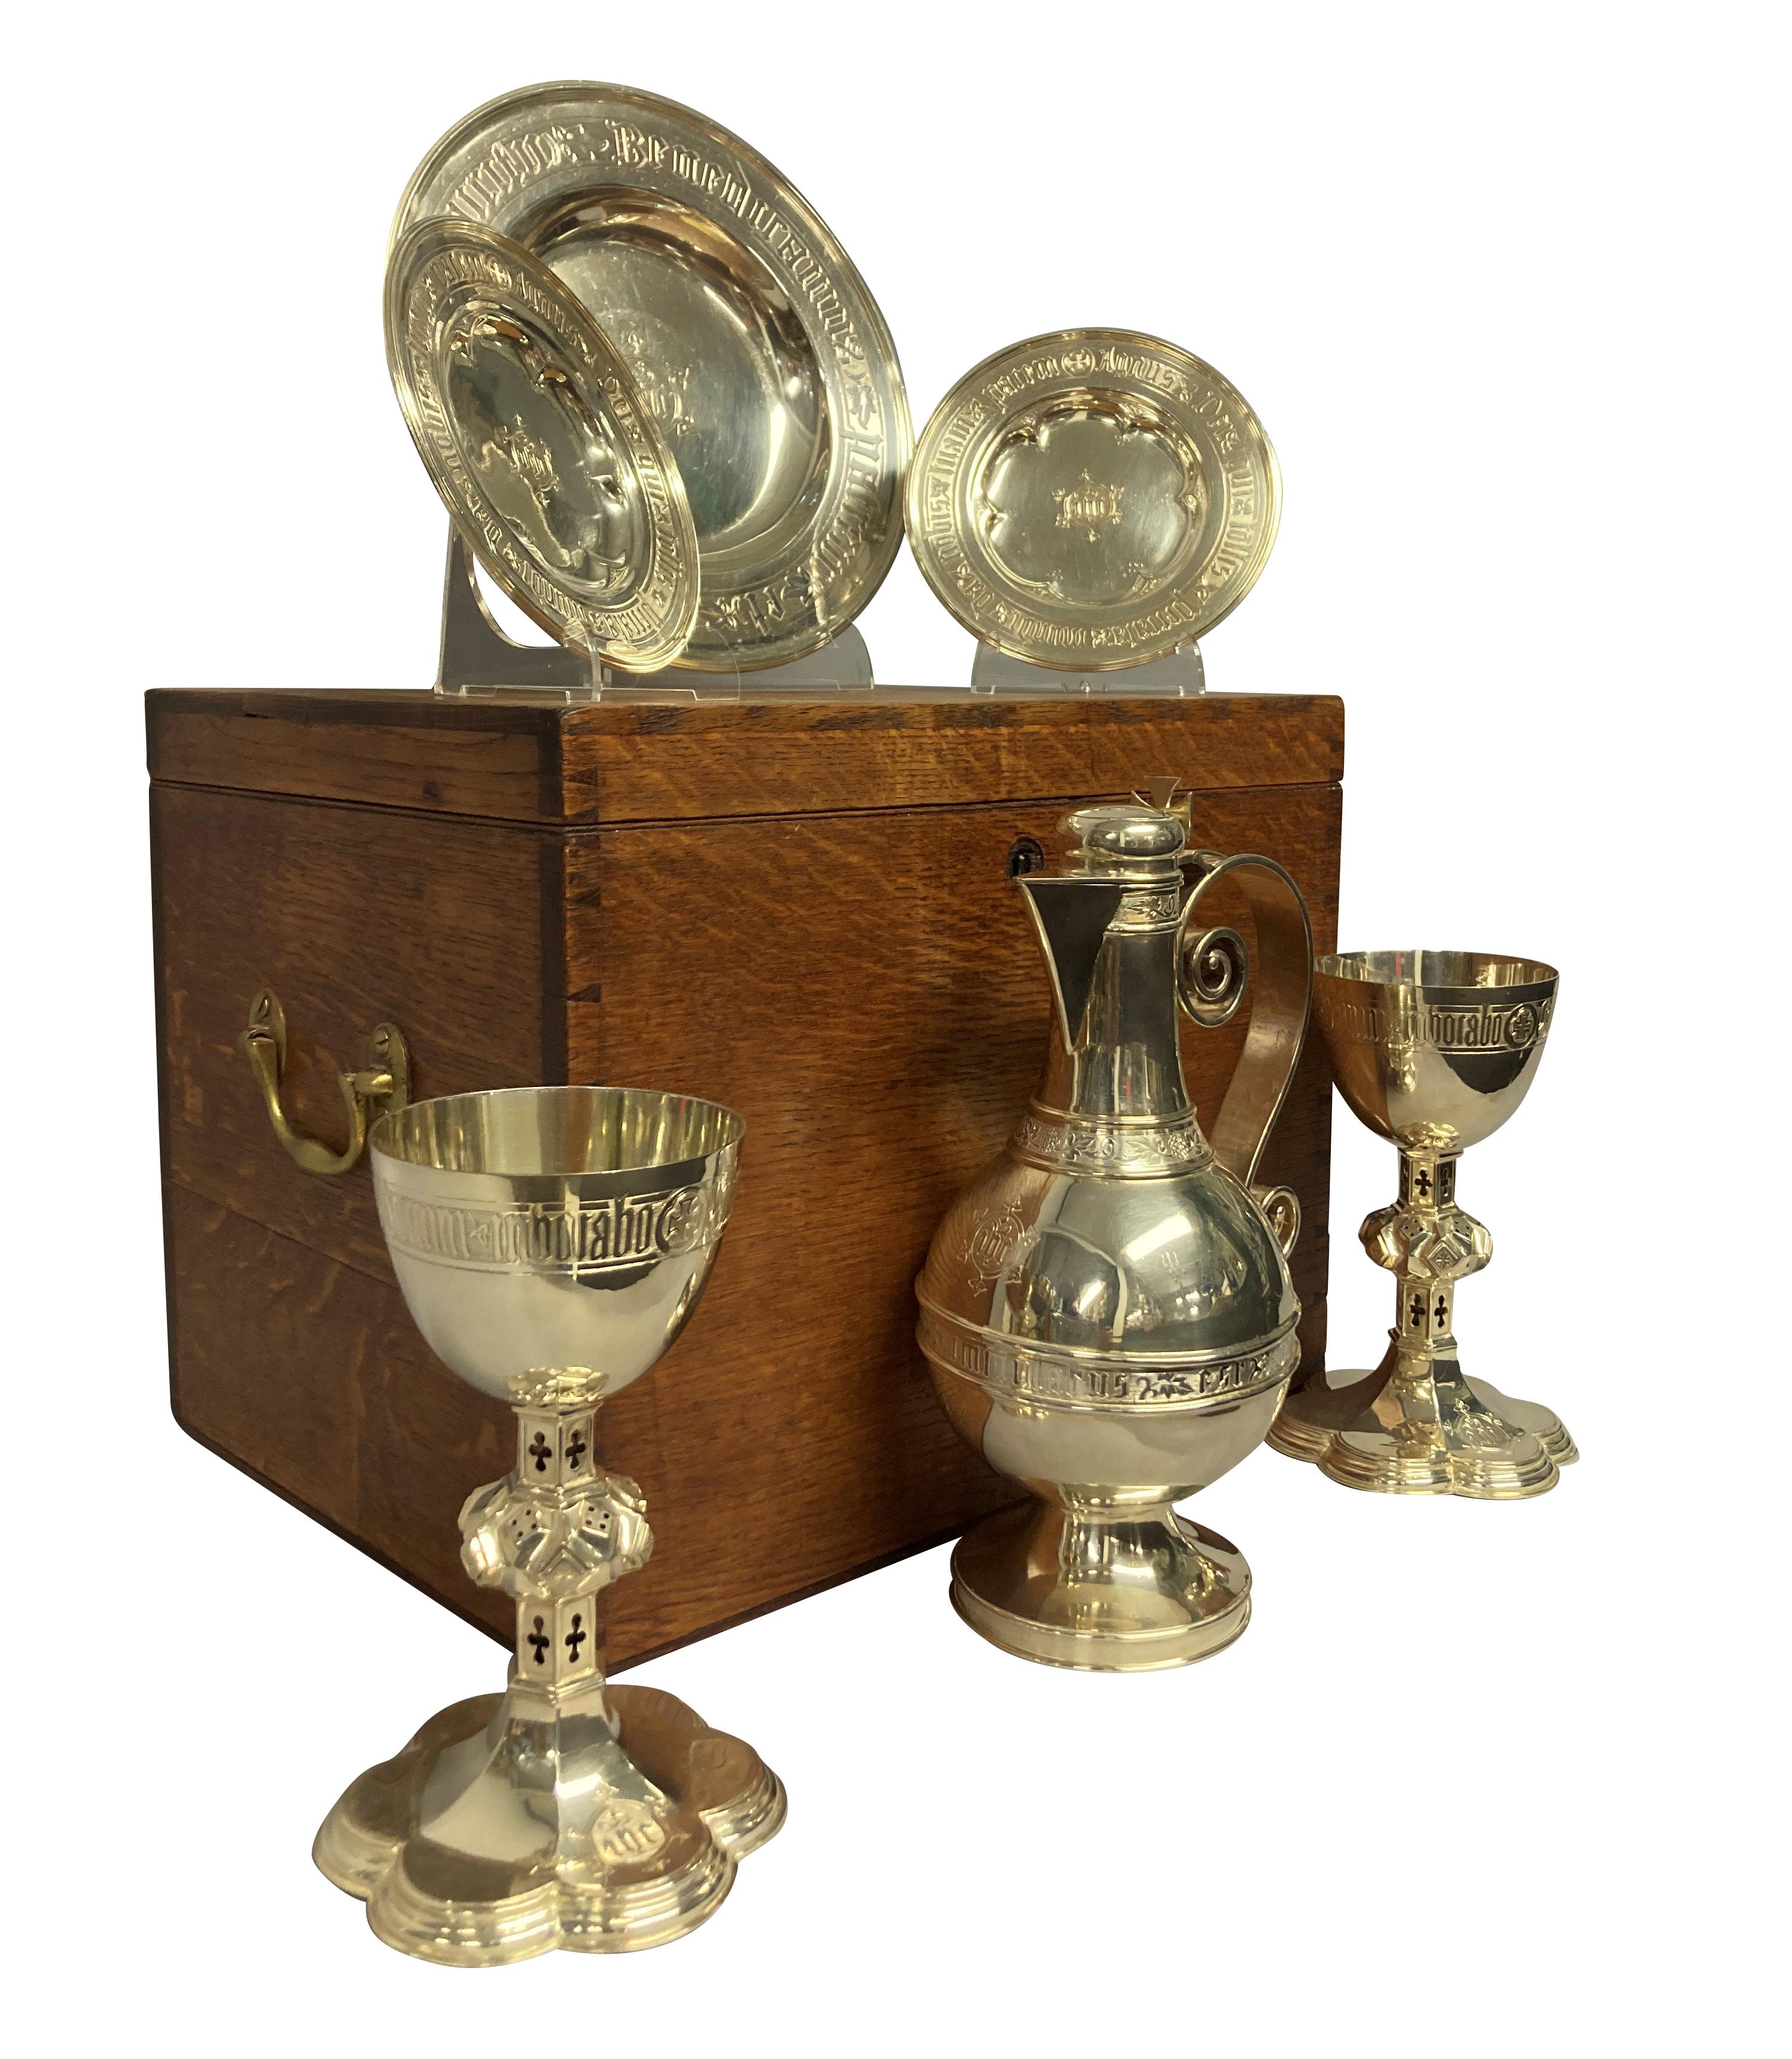 Gothic Silver Communion Set with Original Box by Henry Wilkinson & Sons In Good Condition For Sale In London, GB